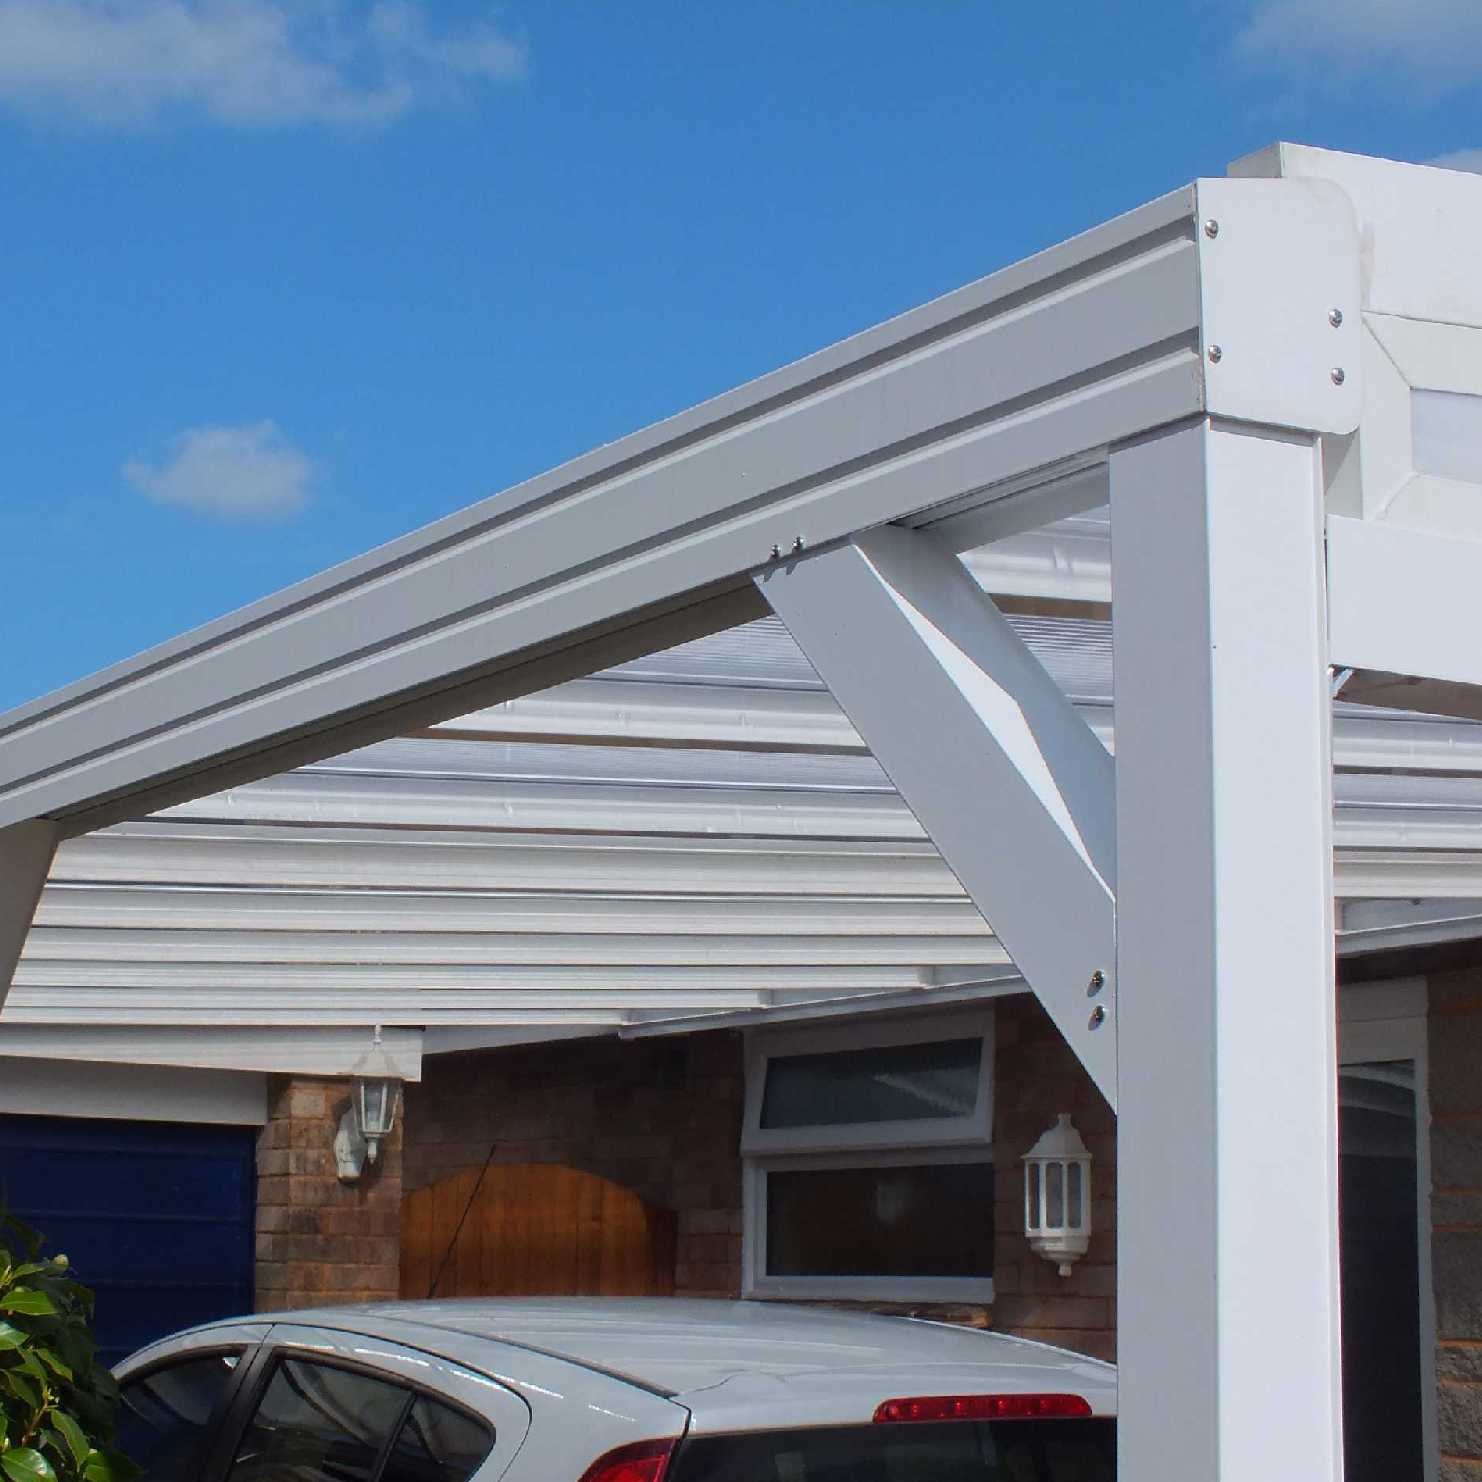 Great deals on Omega Smart Lean-To Canopy, White with 16mm Polycarbonate Glazing - 6.3m (W) x 4.0m (P), (4) Supporting Posts